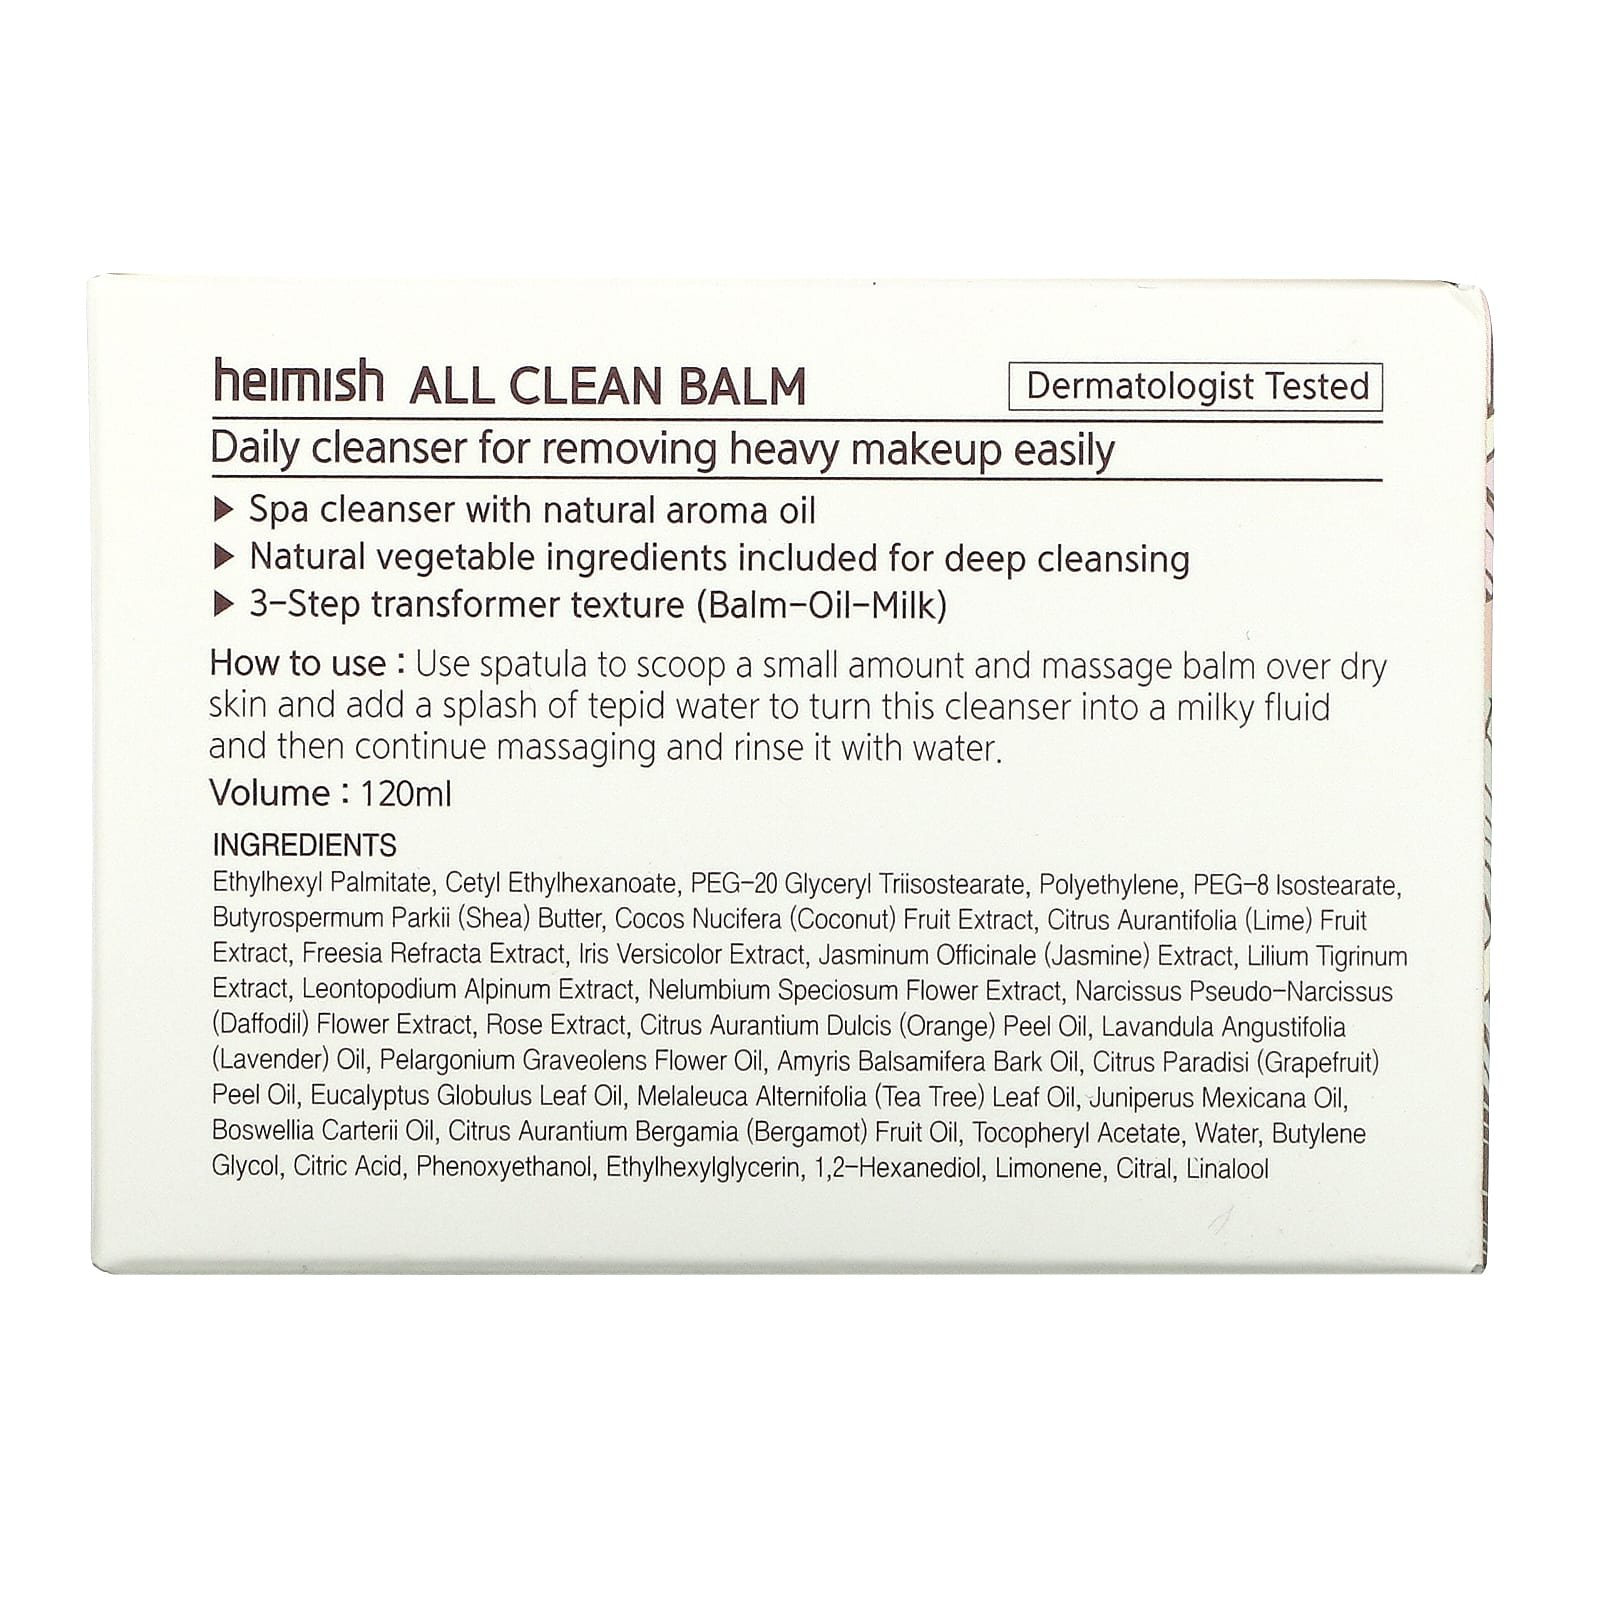 How To Use Heimish All Clean Balm